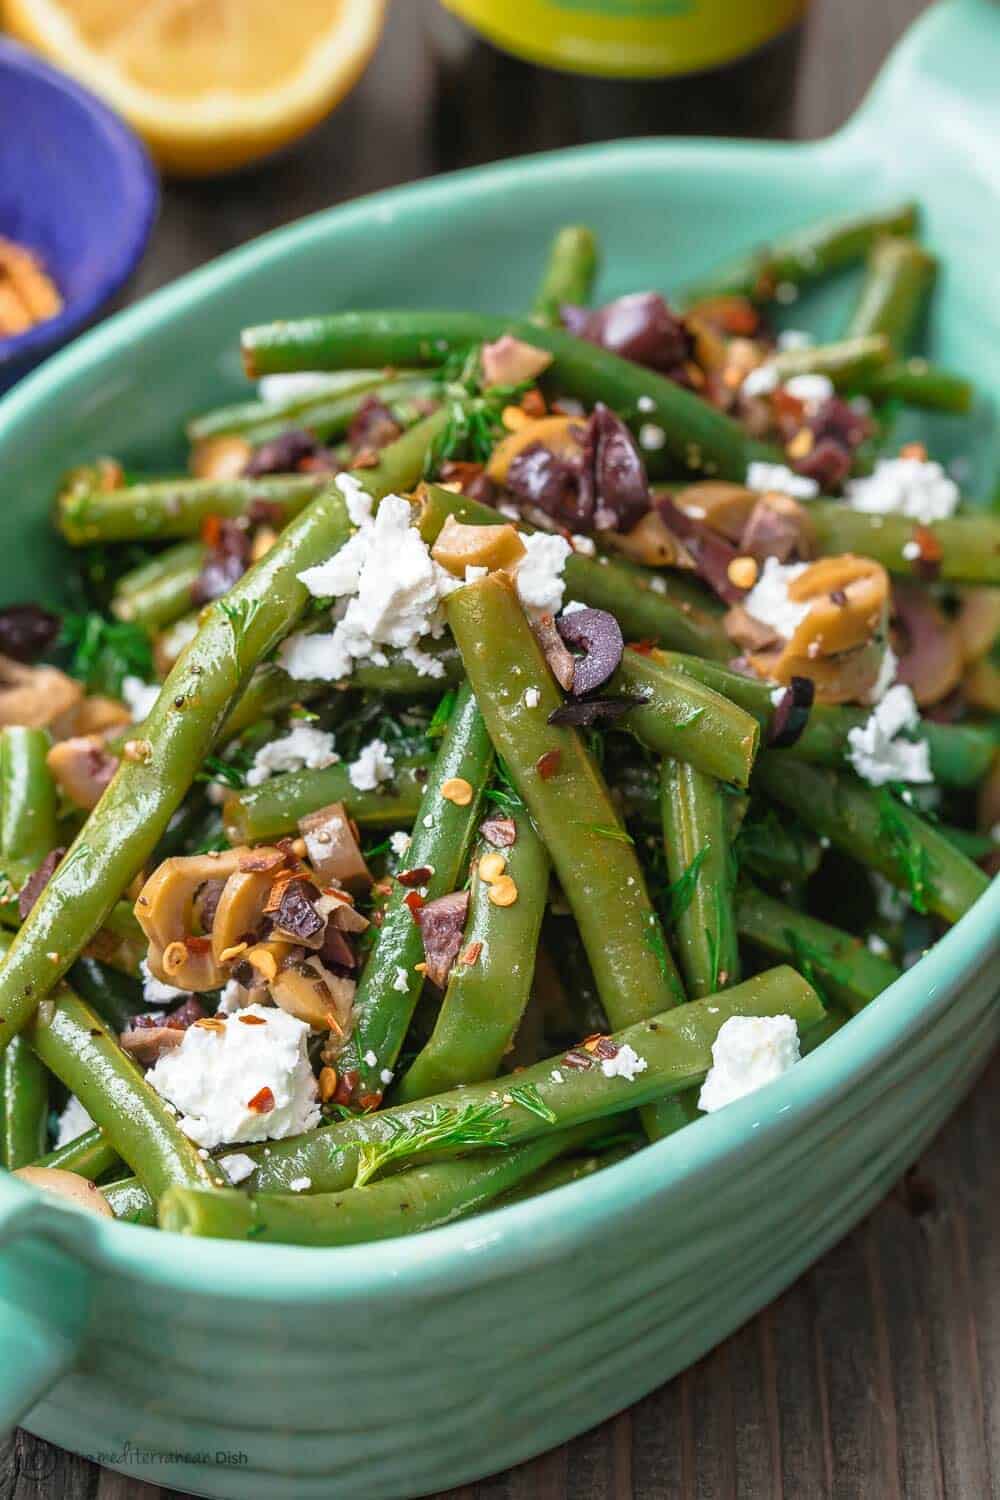 Greek Green Bean Salad Recipe | The Mediterranean Dish. Perfectly tender, flavor-packed green bean salad prepared Greek style. A garlicy, zesty dressing pulls it together, and a sprinkle of feta and chopped marinated olives take it to a new level of delicious. Get the easy recipe on themediterraneandish.com #greenbeans #greekfood #greekrecipe #mediterraneanrecipe #mediterraneandiet